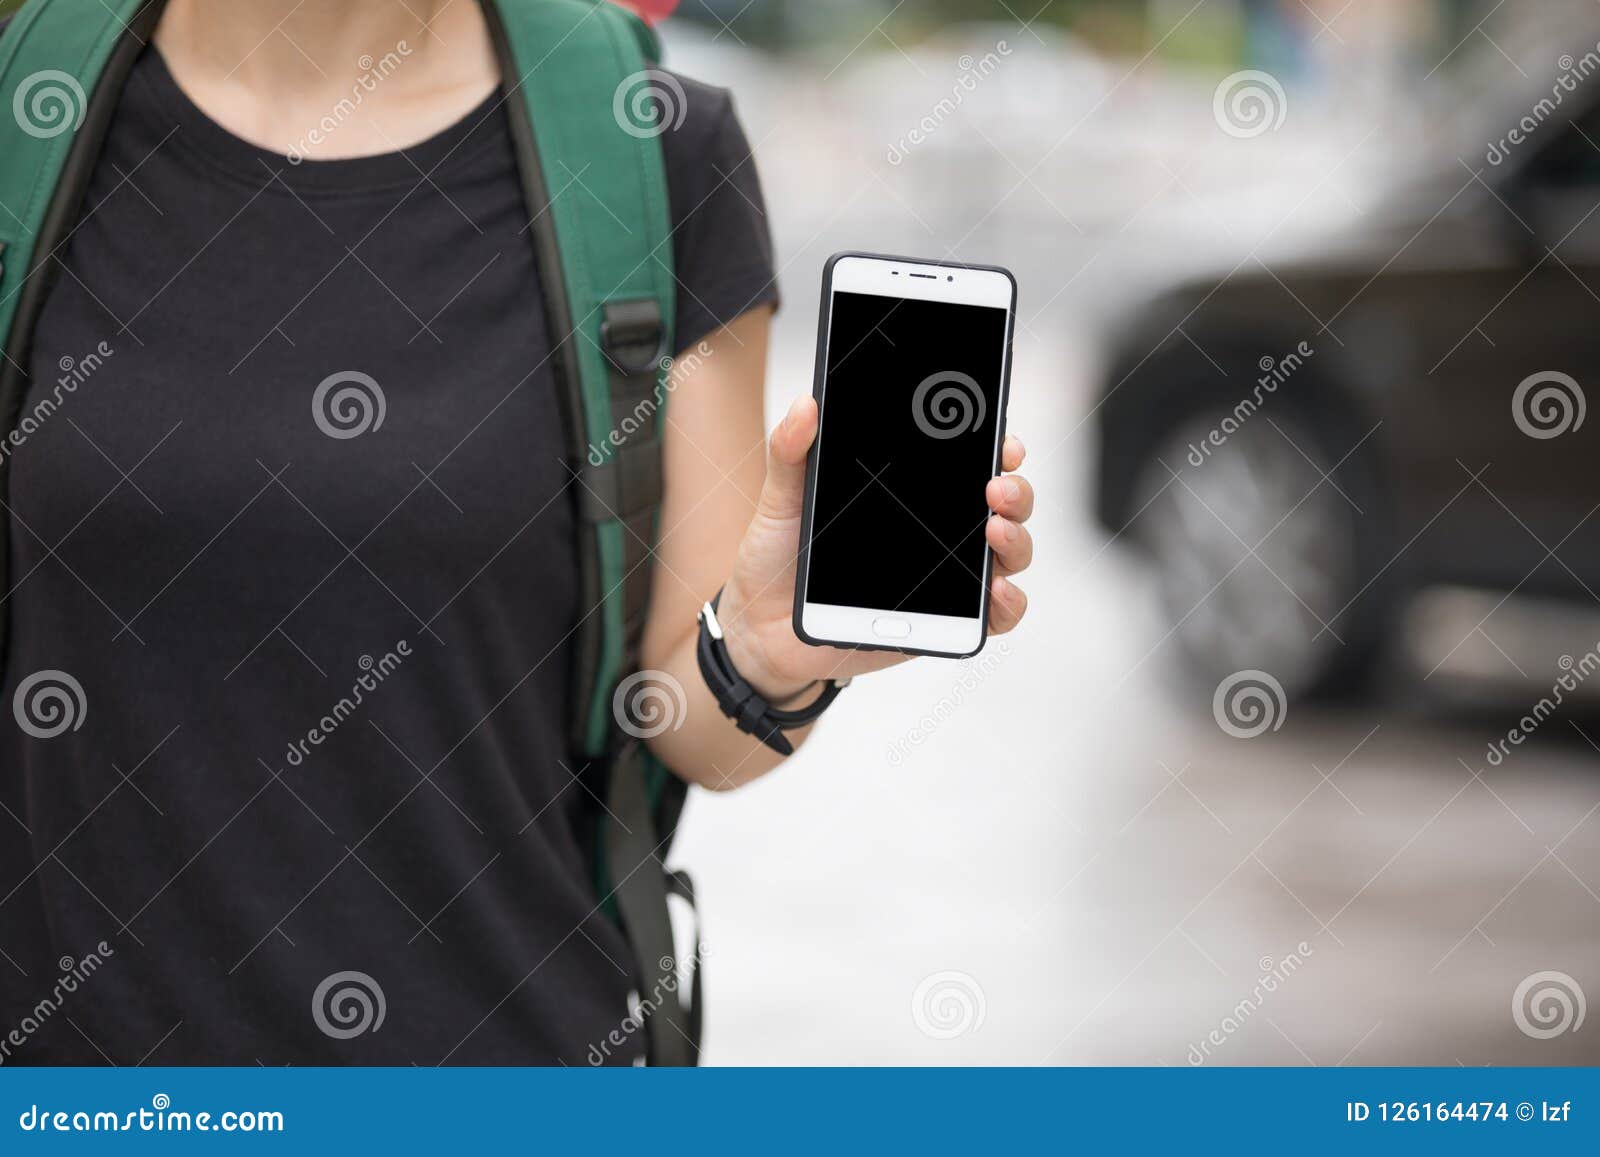 woman hands using smartphone at city